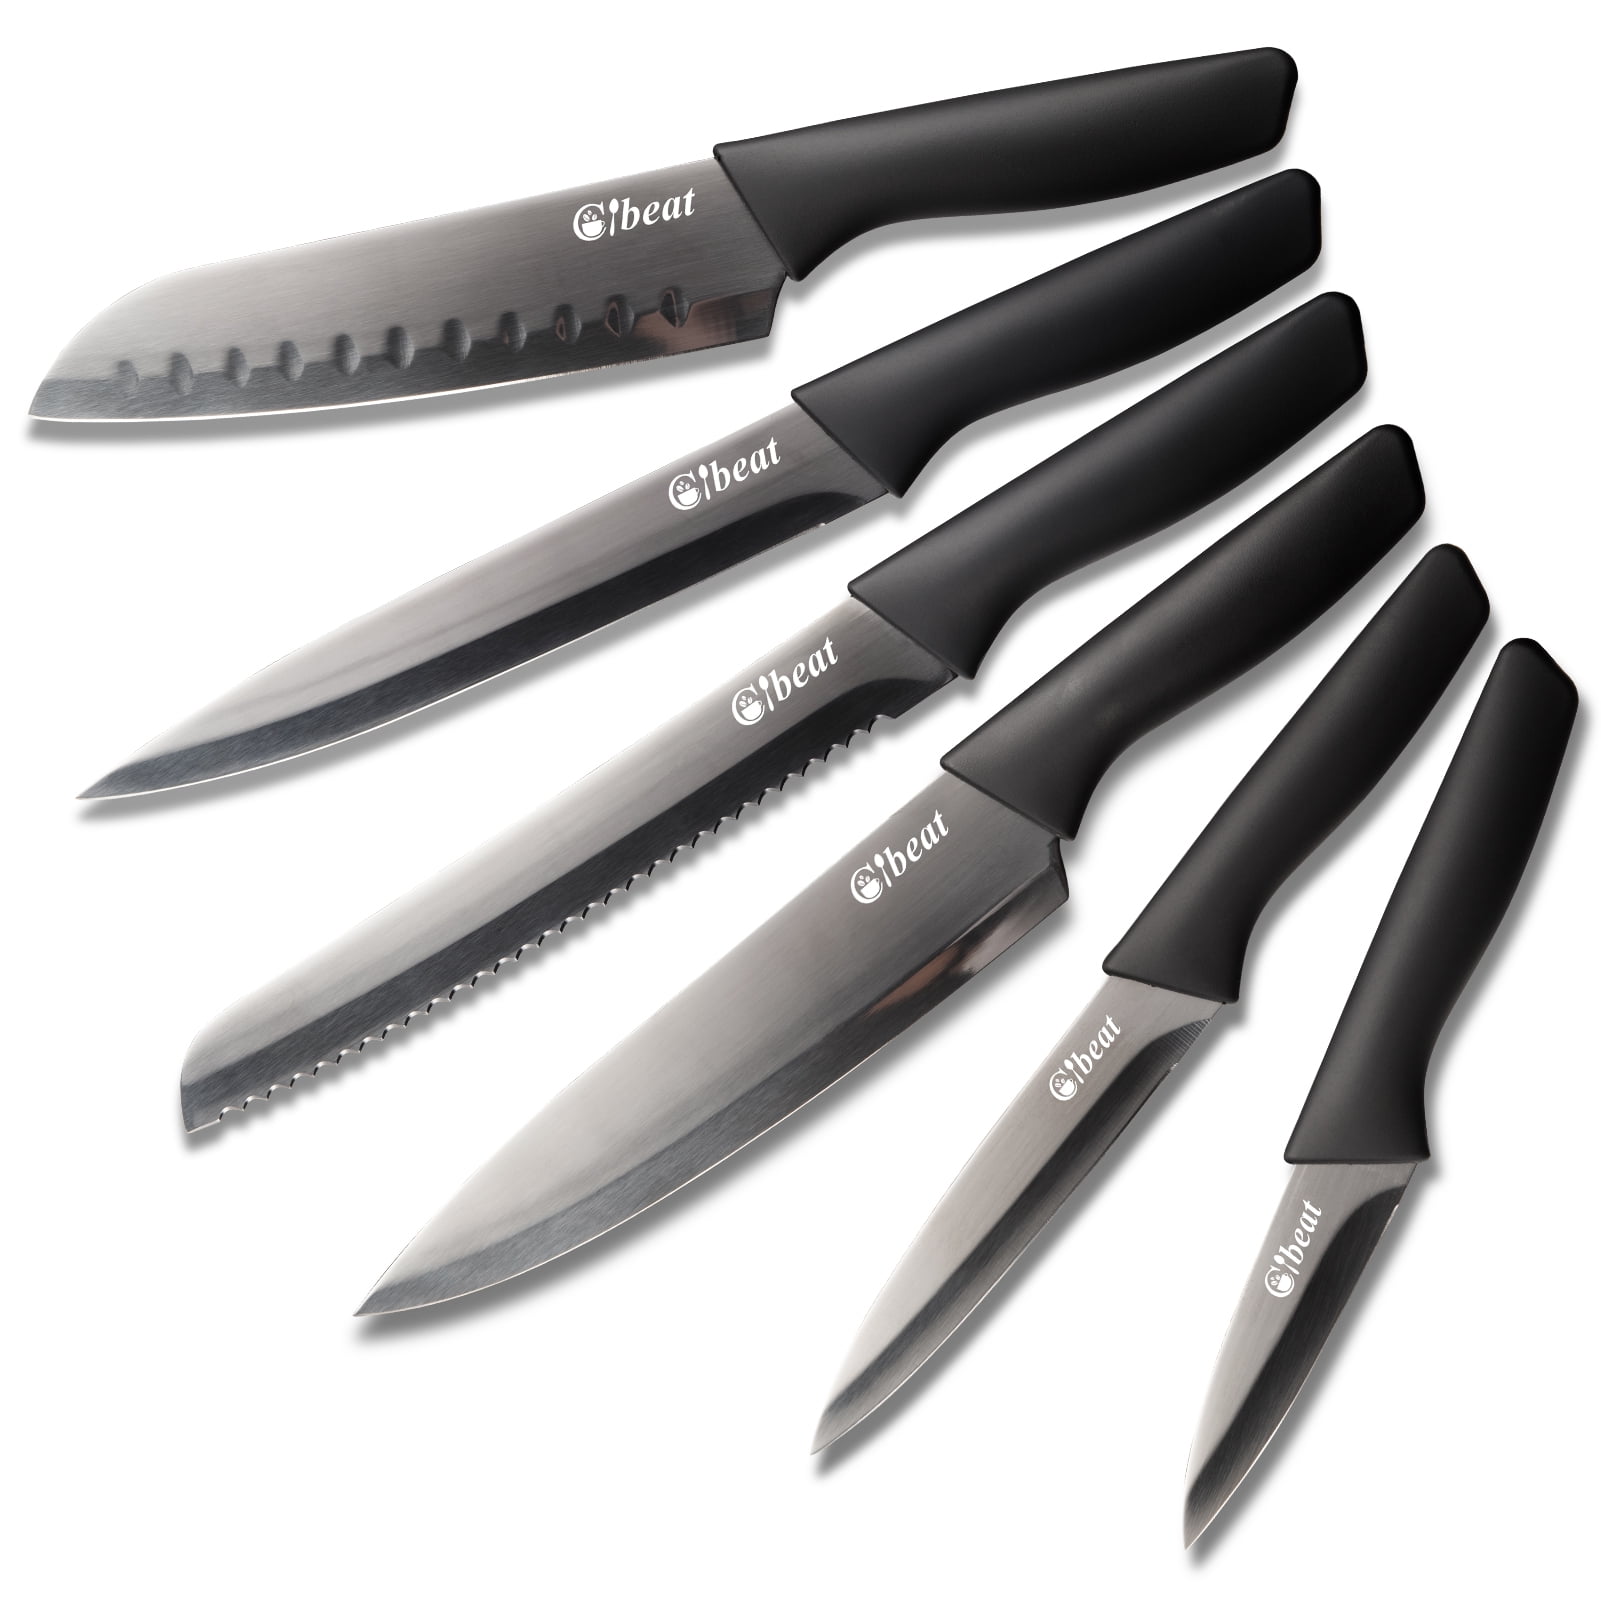 KEEMAKE Kitchen Knife Set Without Block, Professional Sharp Chef Knife Set  With German 4116 Stainless Steel Cooking Knives Set For Kitchen With  Pakkawood Handle, 6 Piece In Elegant Gift Box on Galleon Philippines